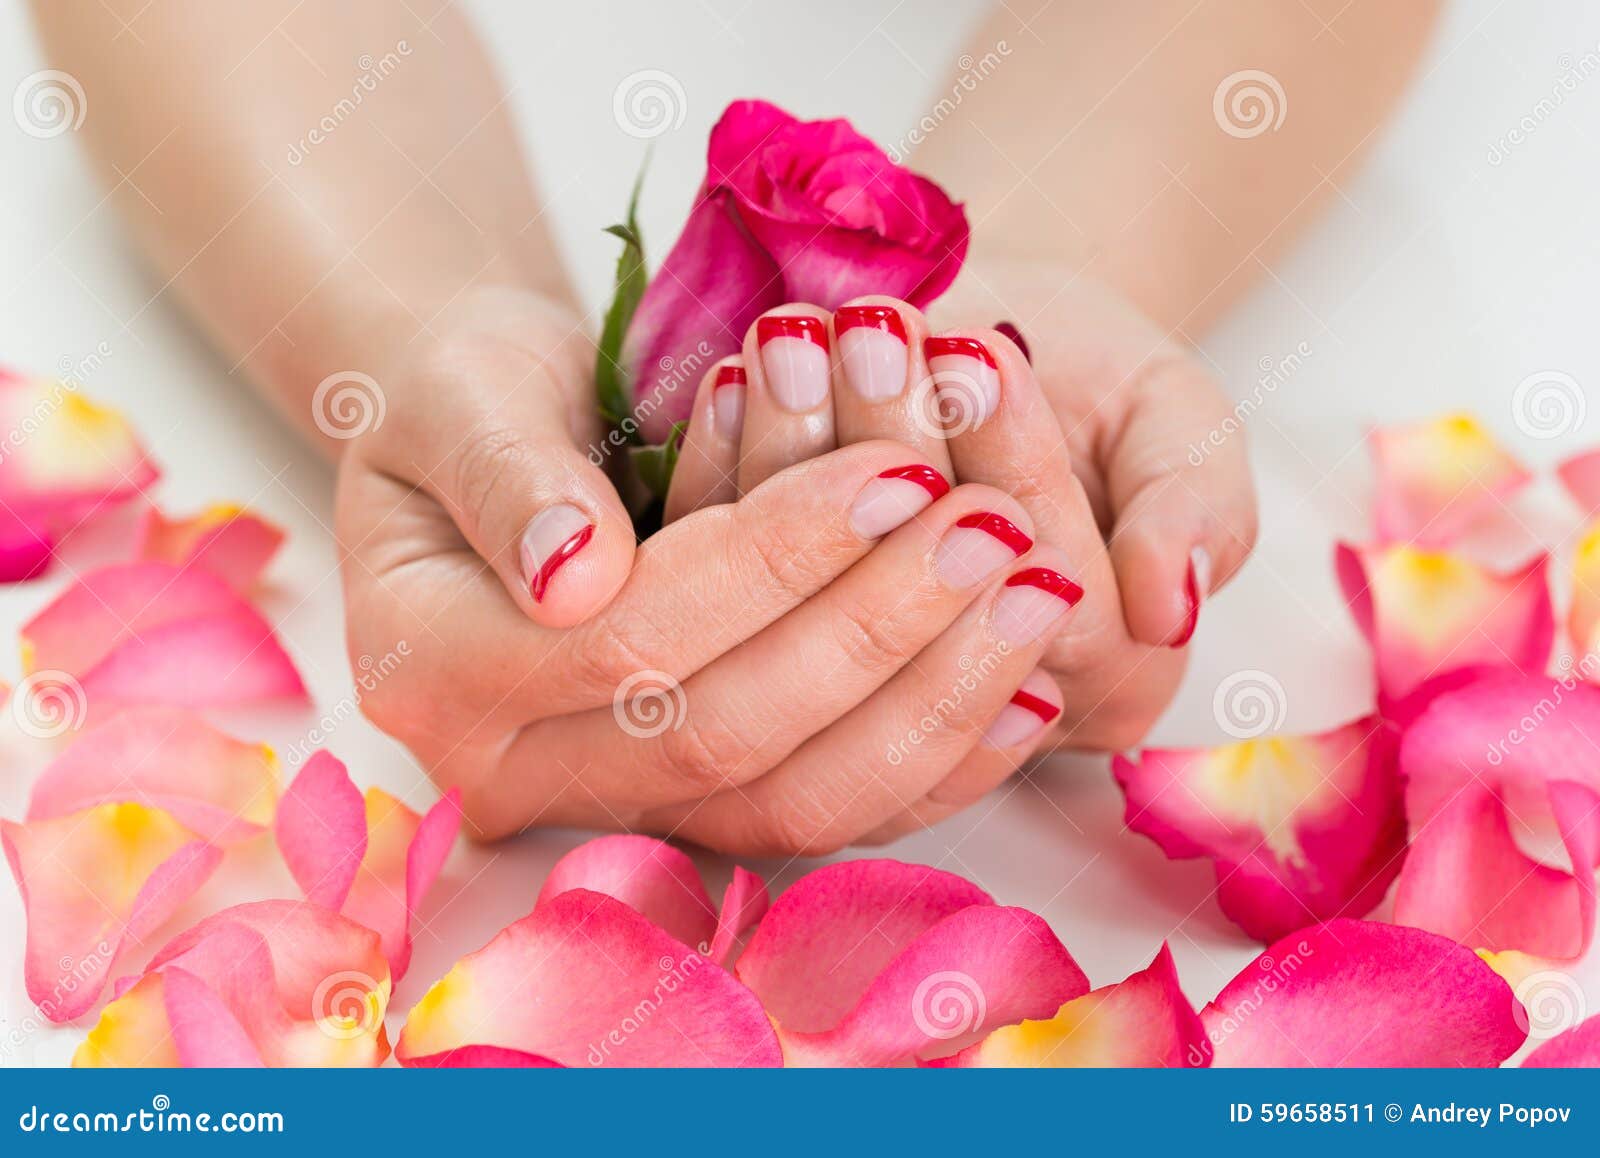 woman hands with nail varnish holding rose